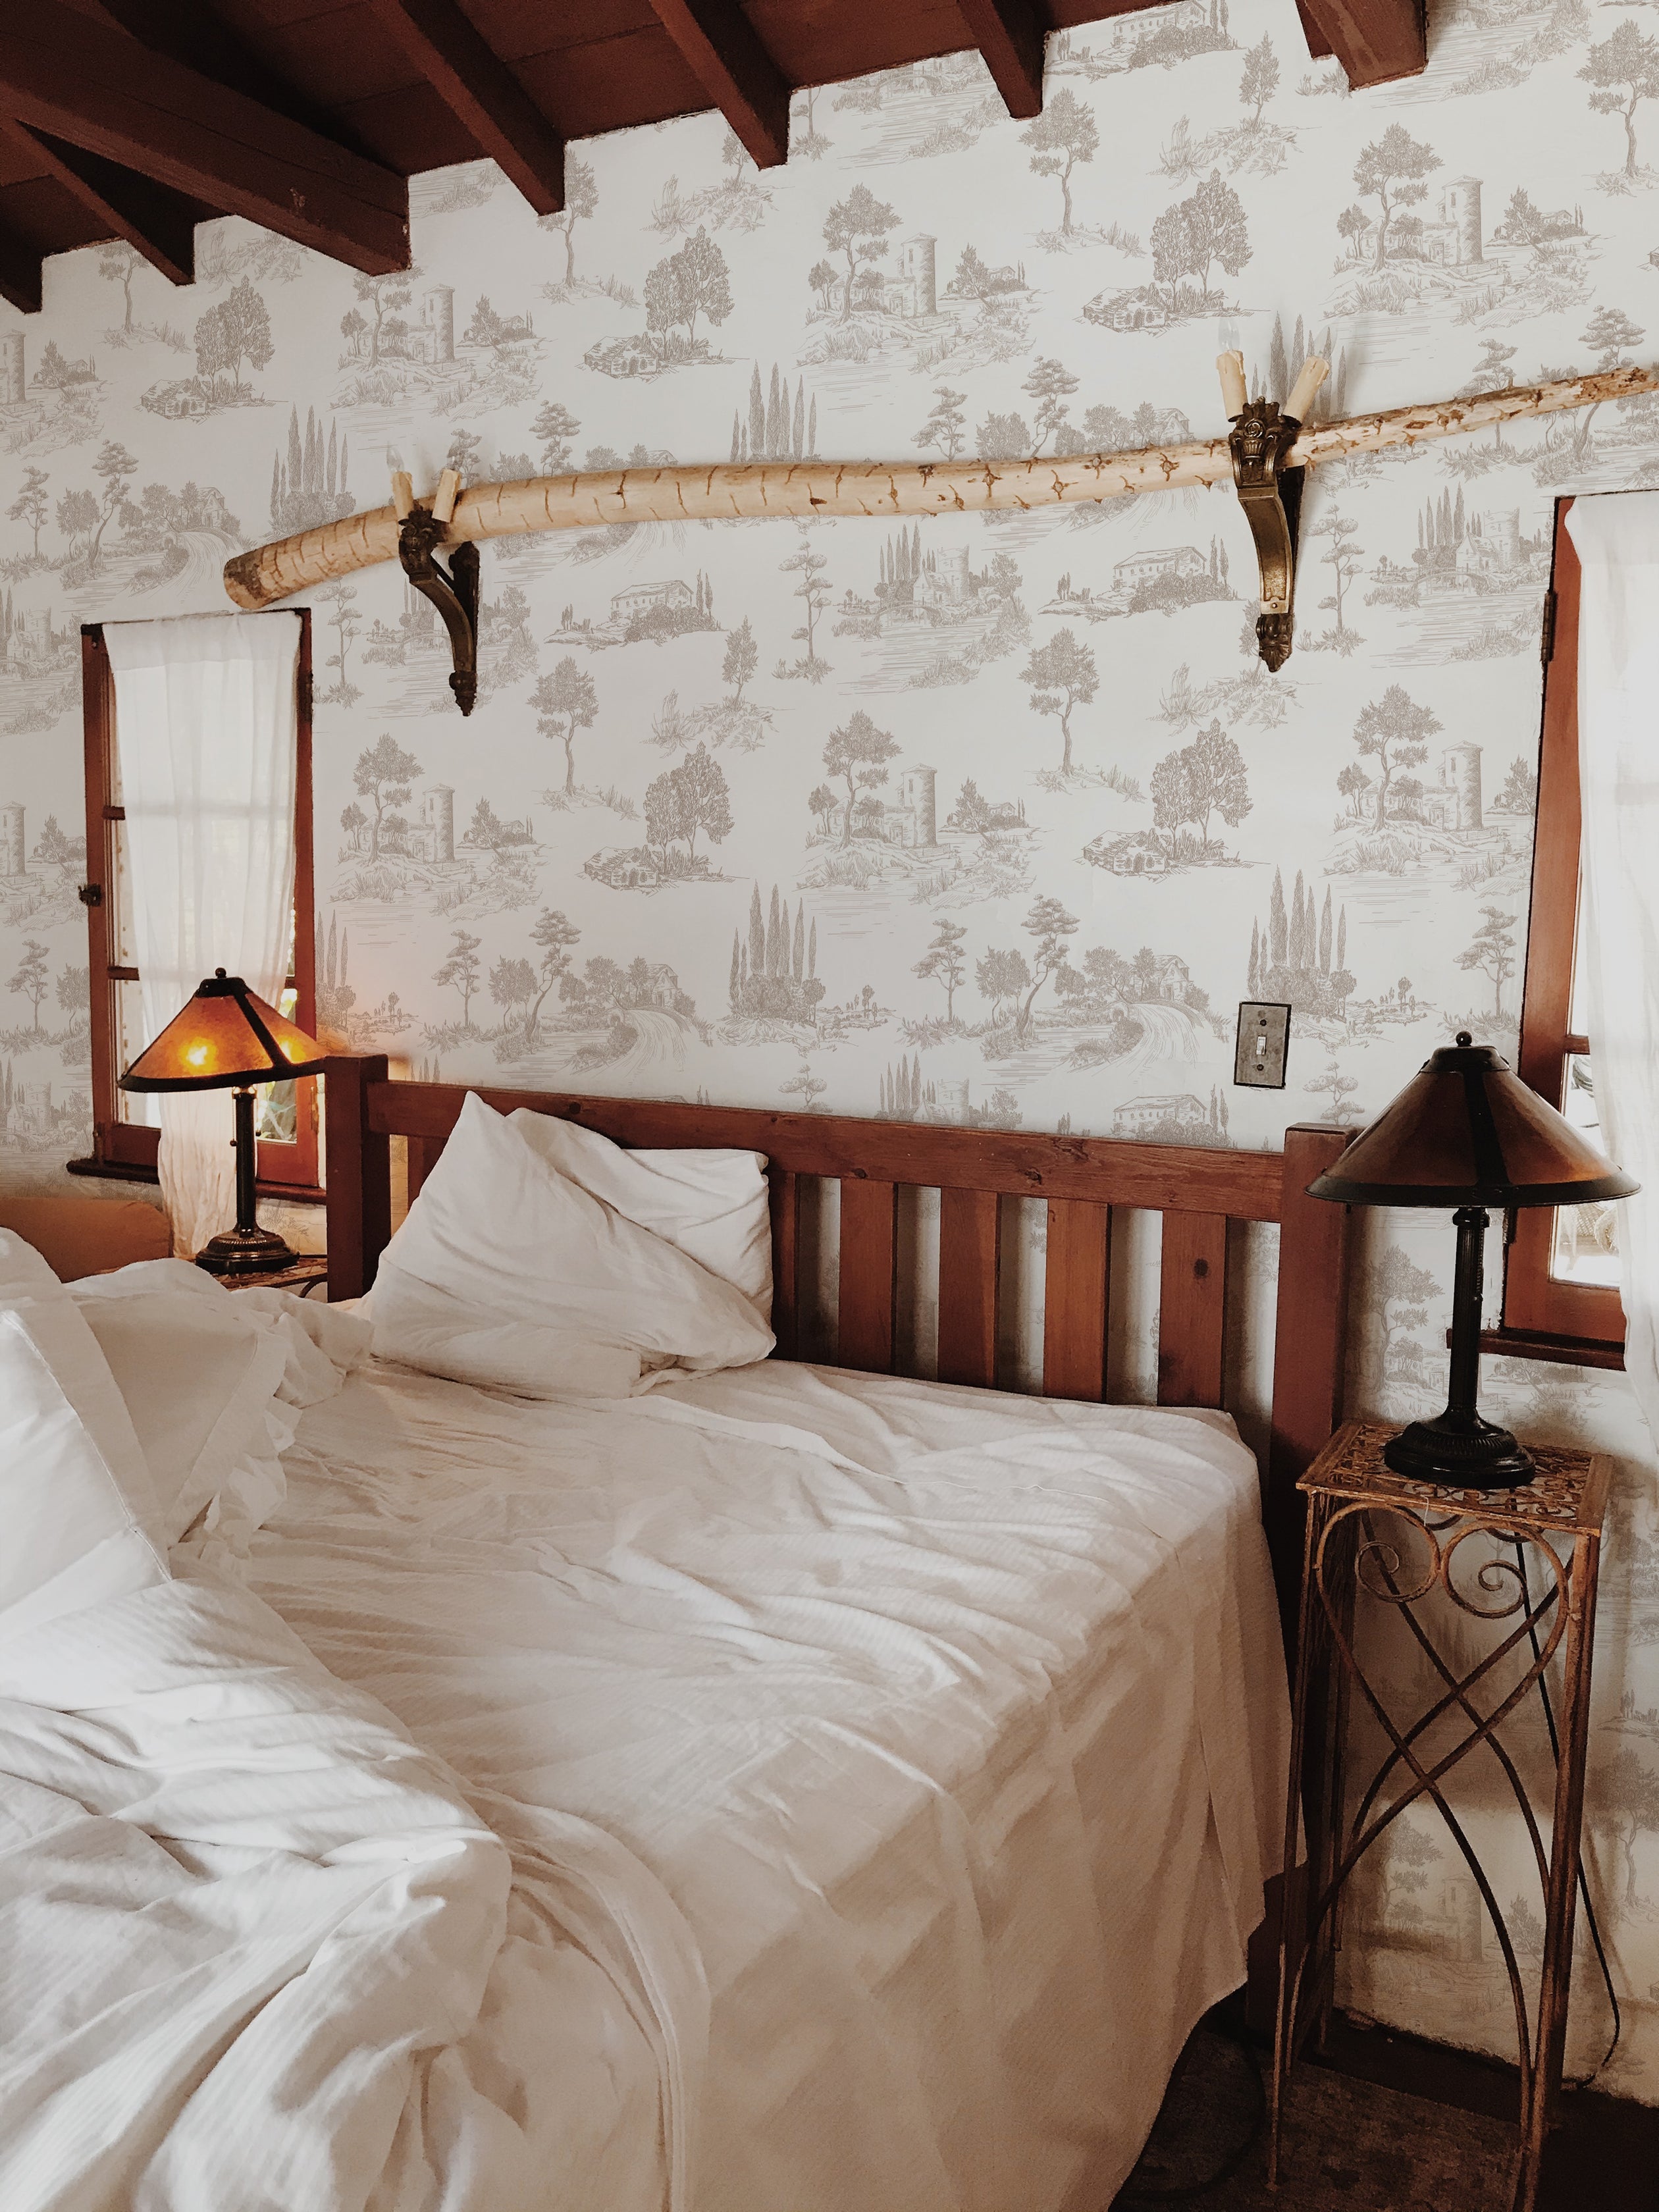 A rustic bedroom setting featuring the Farmhouse Toile Wallpaper, which complements the wooden bed frame and traditional decor, highlighting the wallpaper's ability to infuse historical elegance into a homely and inviting atmosphere.